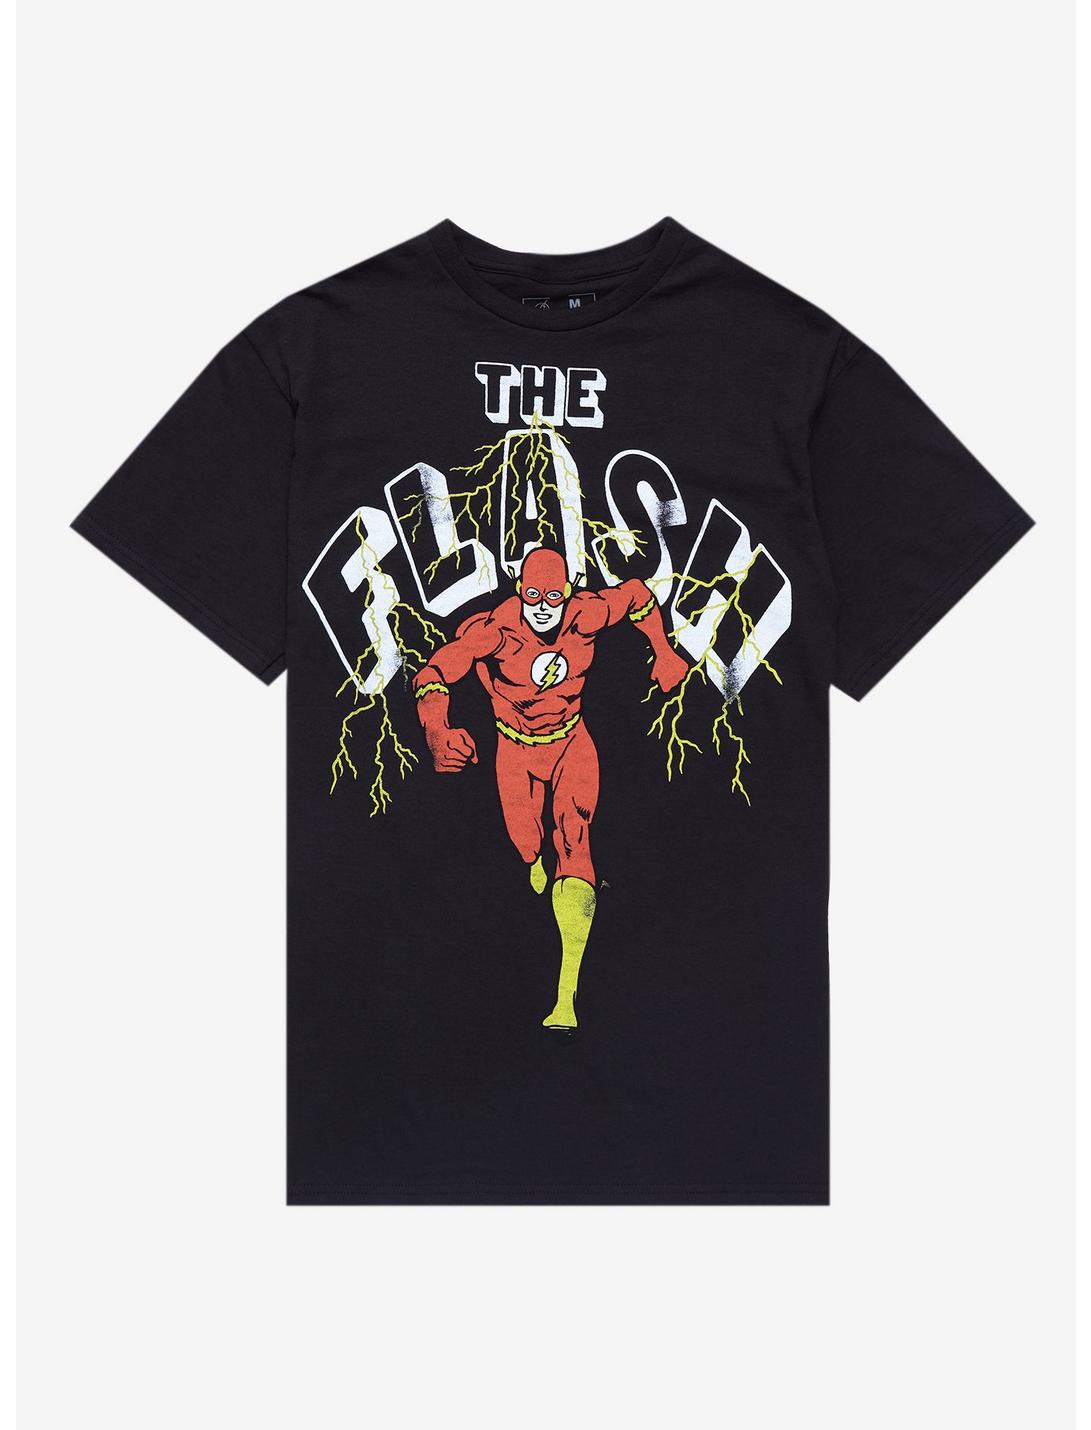 Black Graphic T-shirt featuring The Flash DC character running